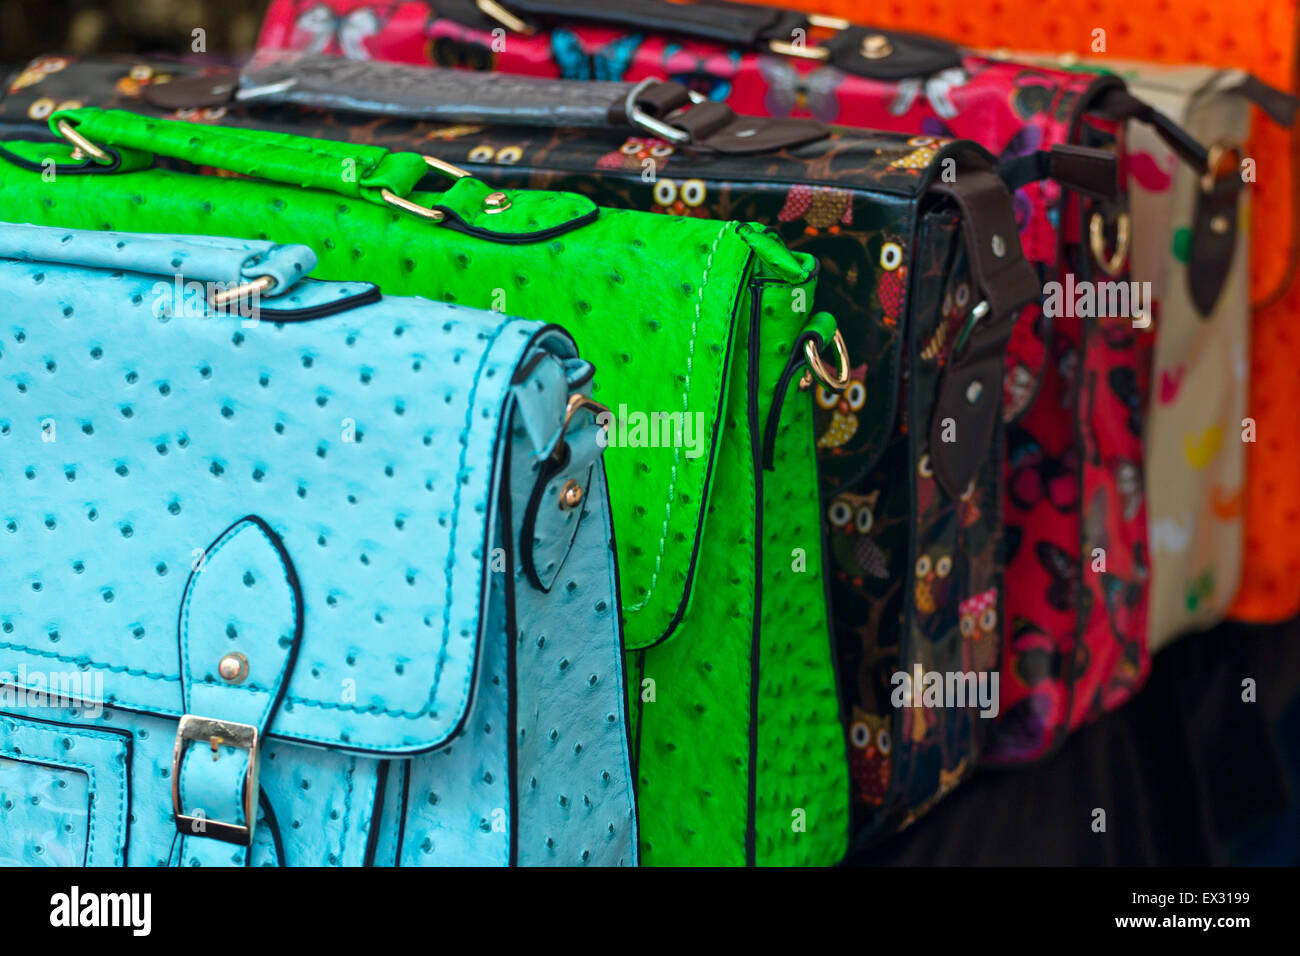 Range of colorful handbags for retail sale at a local market stall or smallholders independent shop display. Stock Photo